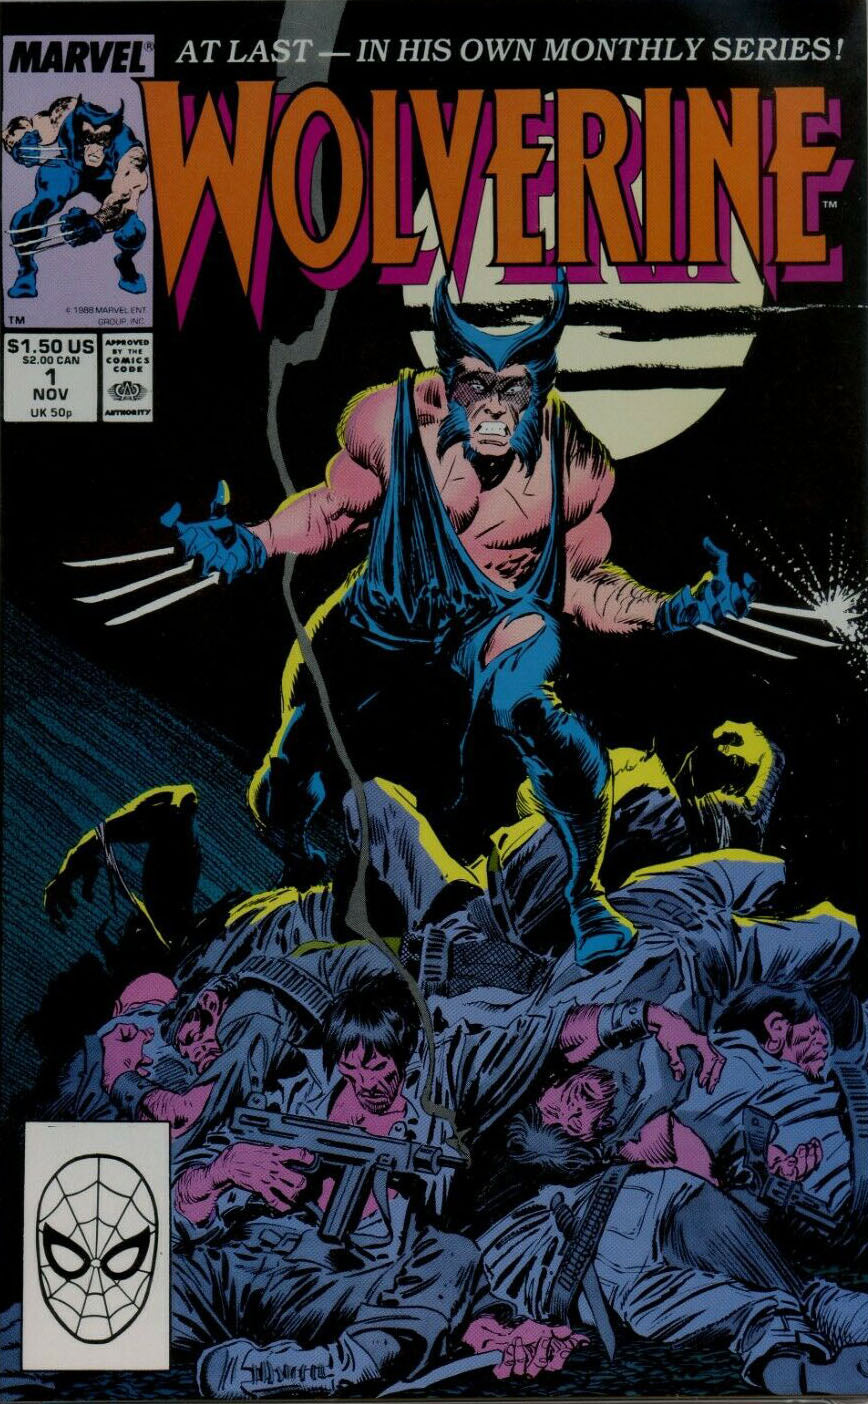 WOLVERINE (1988) #1 (FN/VF) - FIRST APPEARANCE WOLVERINE AS PATCH